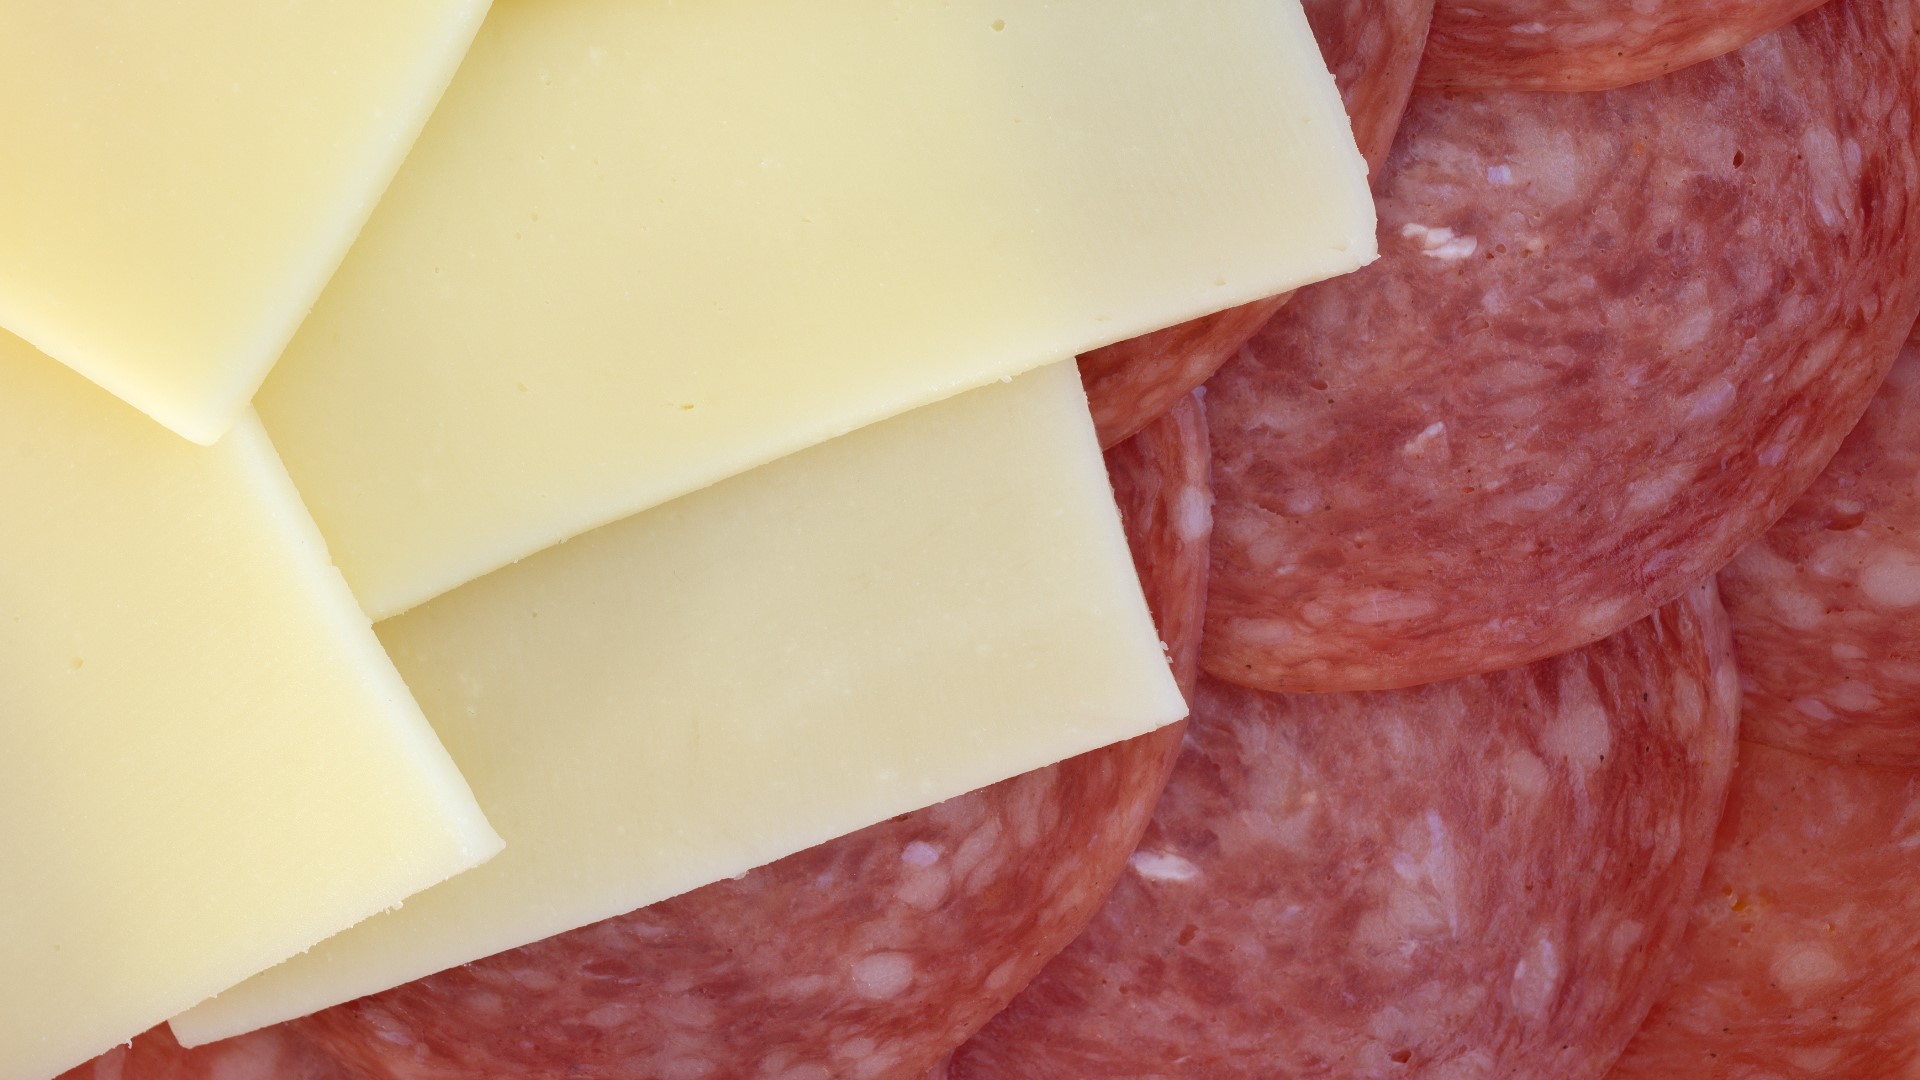 The Centers for Disease Control and Prevention is still investigating a multi-year listeria outbreak that they say is linked back to deli meats or cheese contaminated with the bacteria listeria monocytogenes. The outbreak has hospitalized 8 people -- one person was from Michigan and has since died.